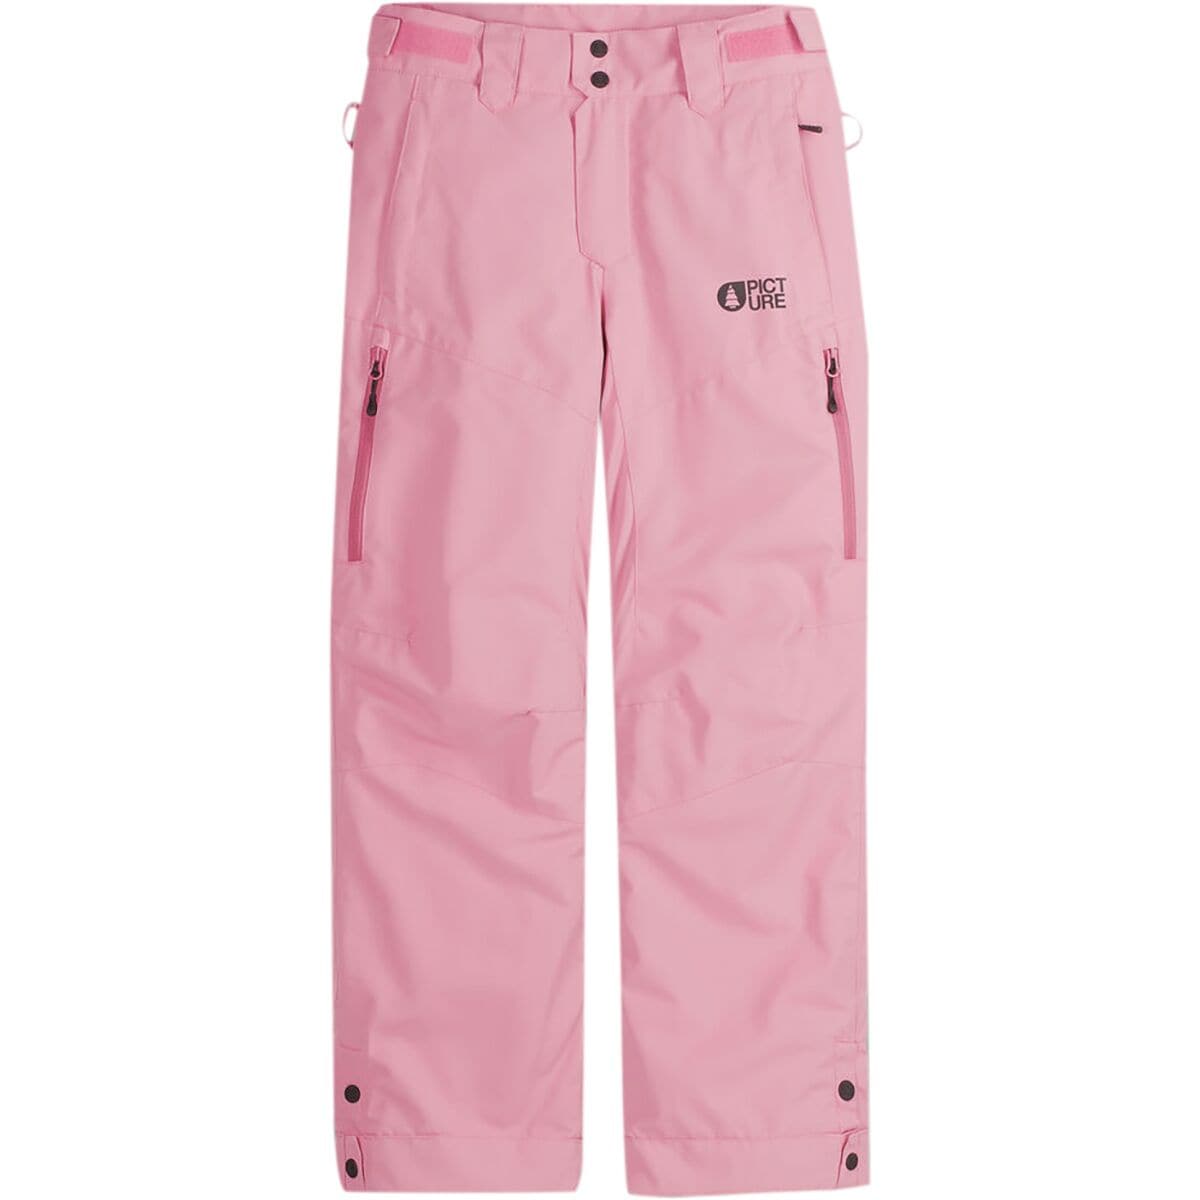 Picture Organic Time Pant - Boys'